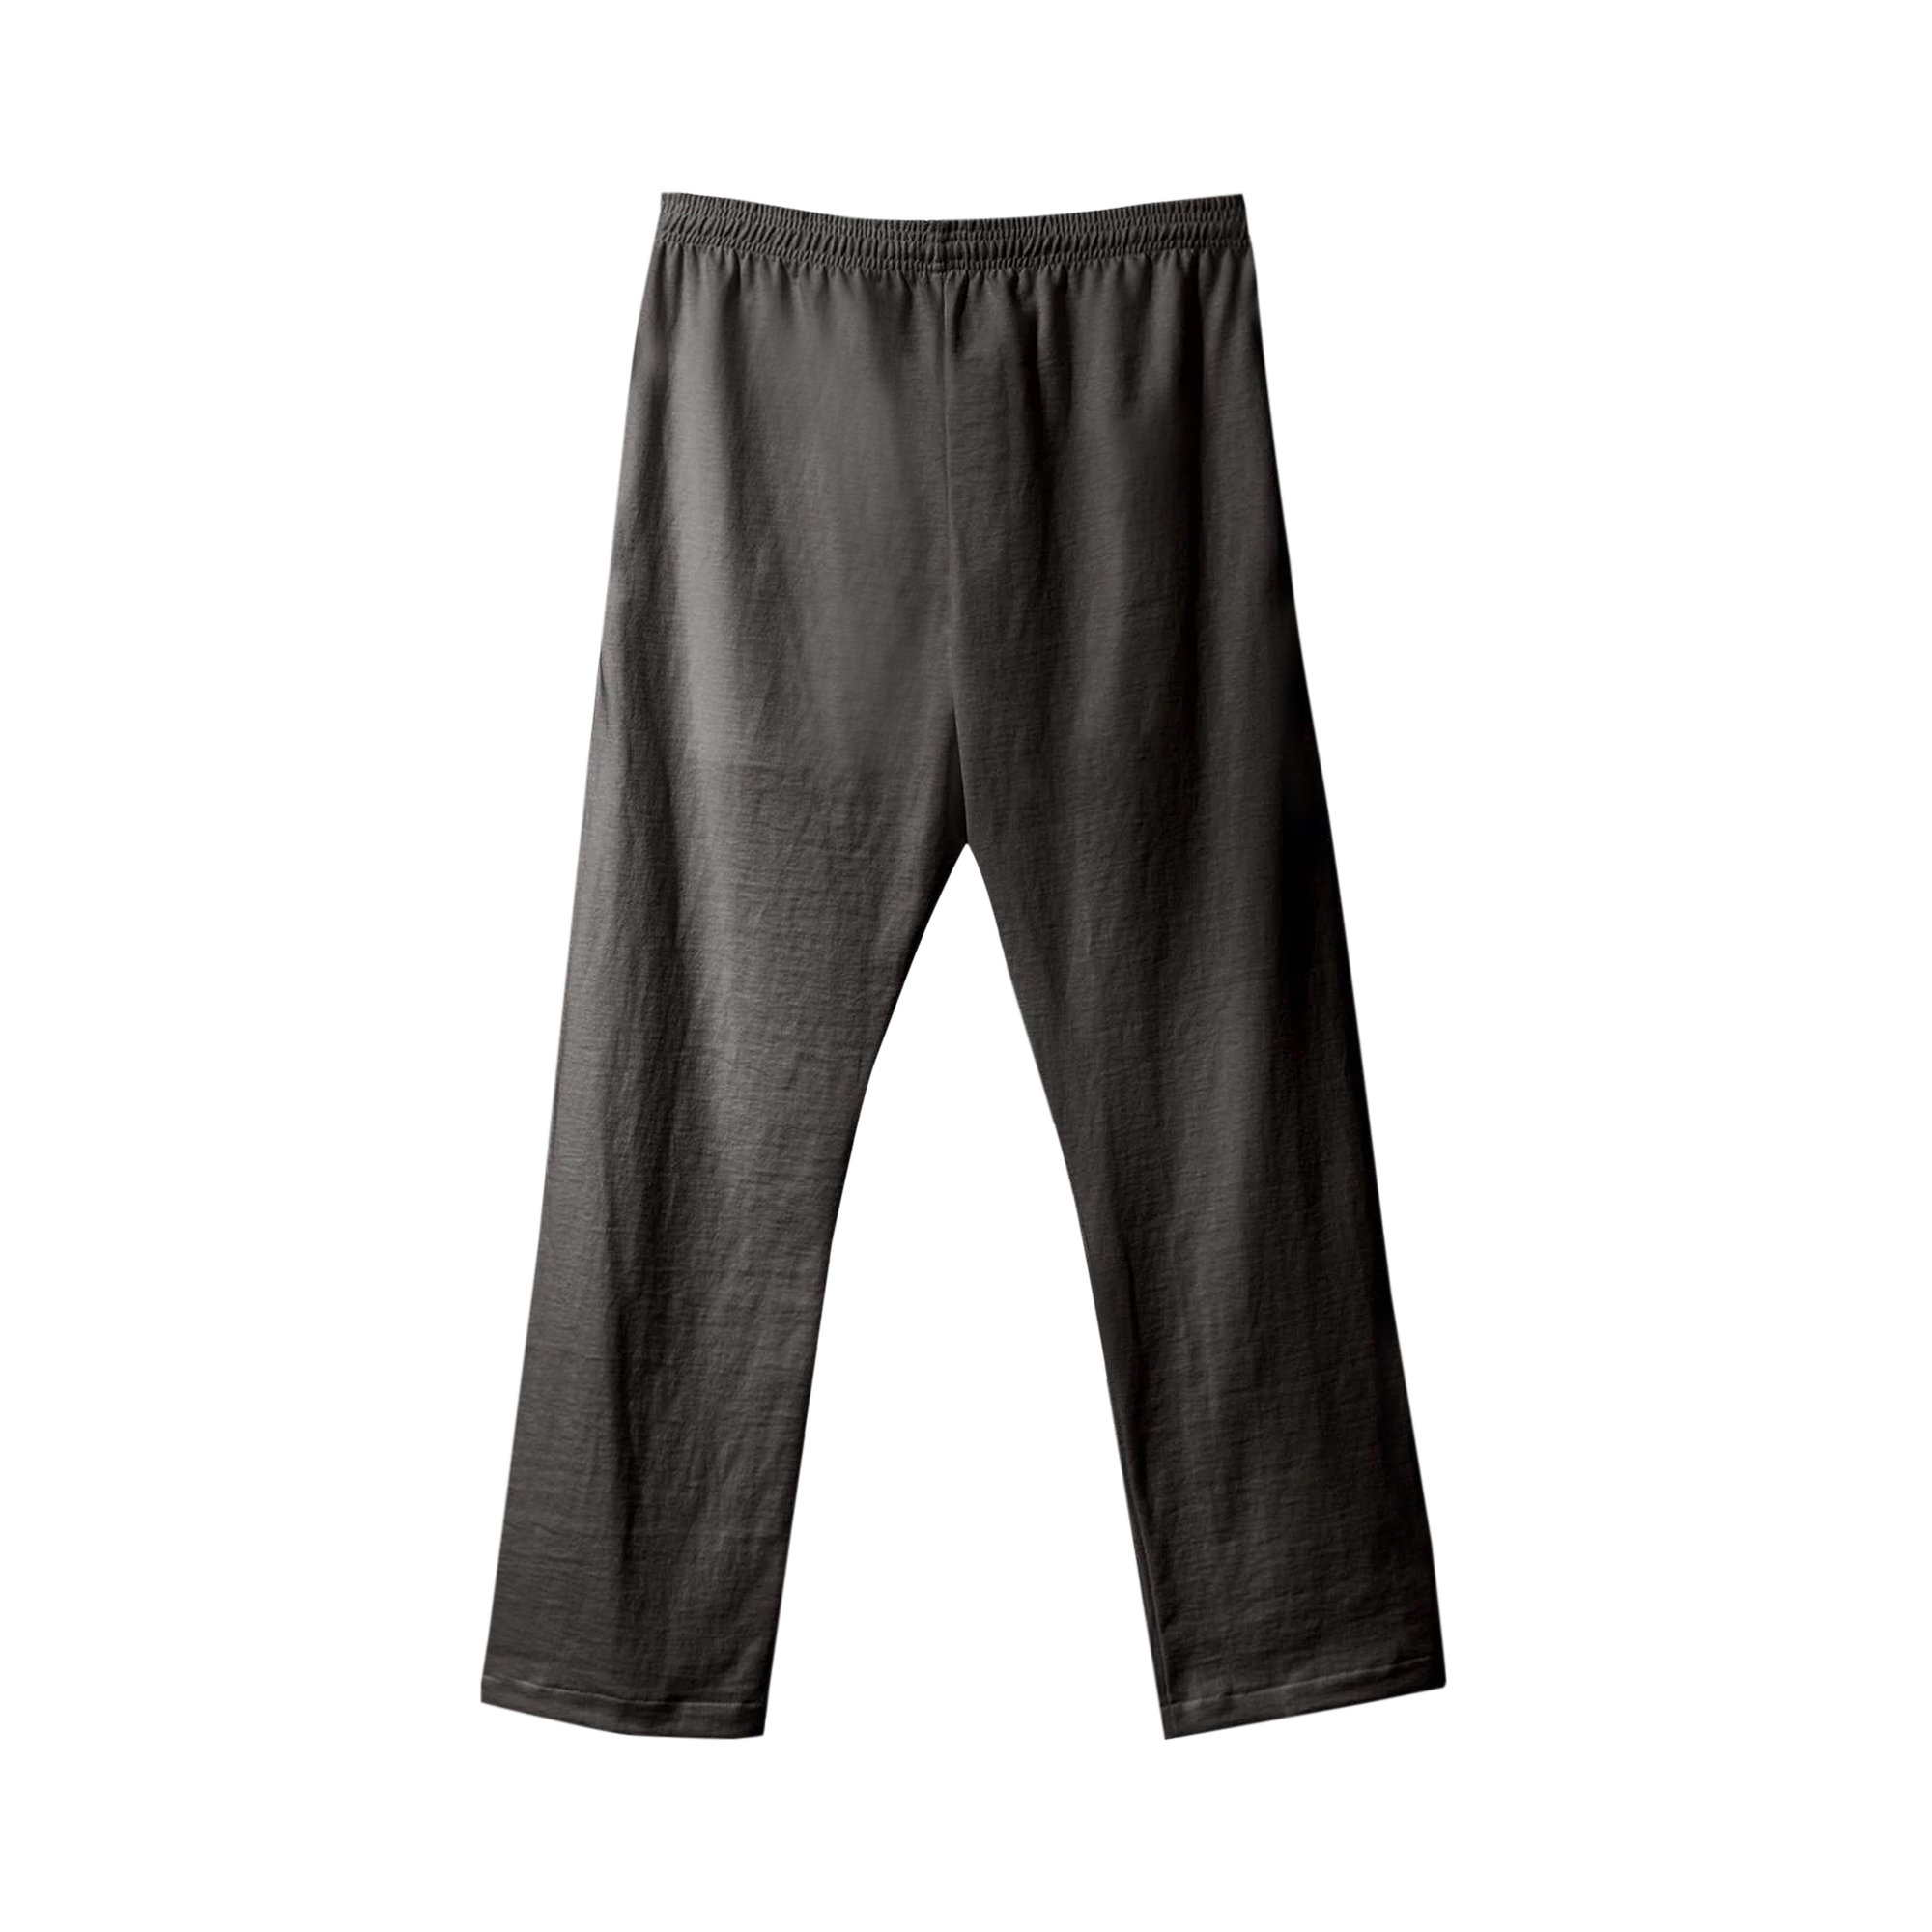 Buy Yeezy Gap Engineered By Balenciaga Fitted Sweatpants 'Washed ...